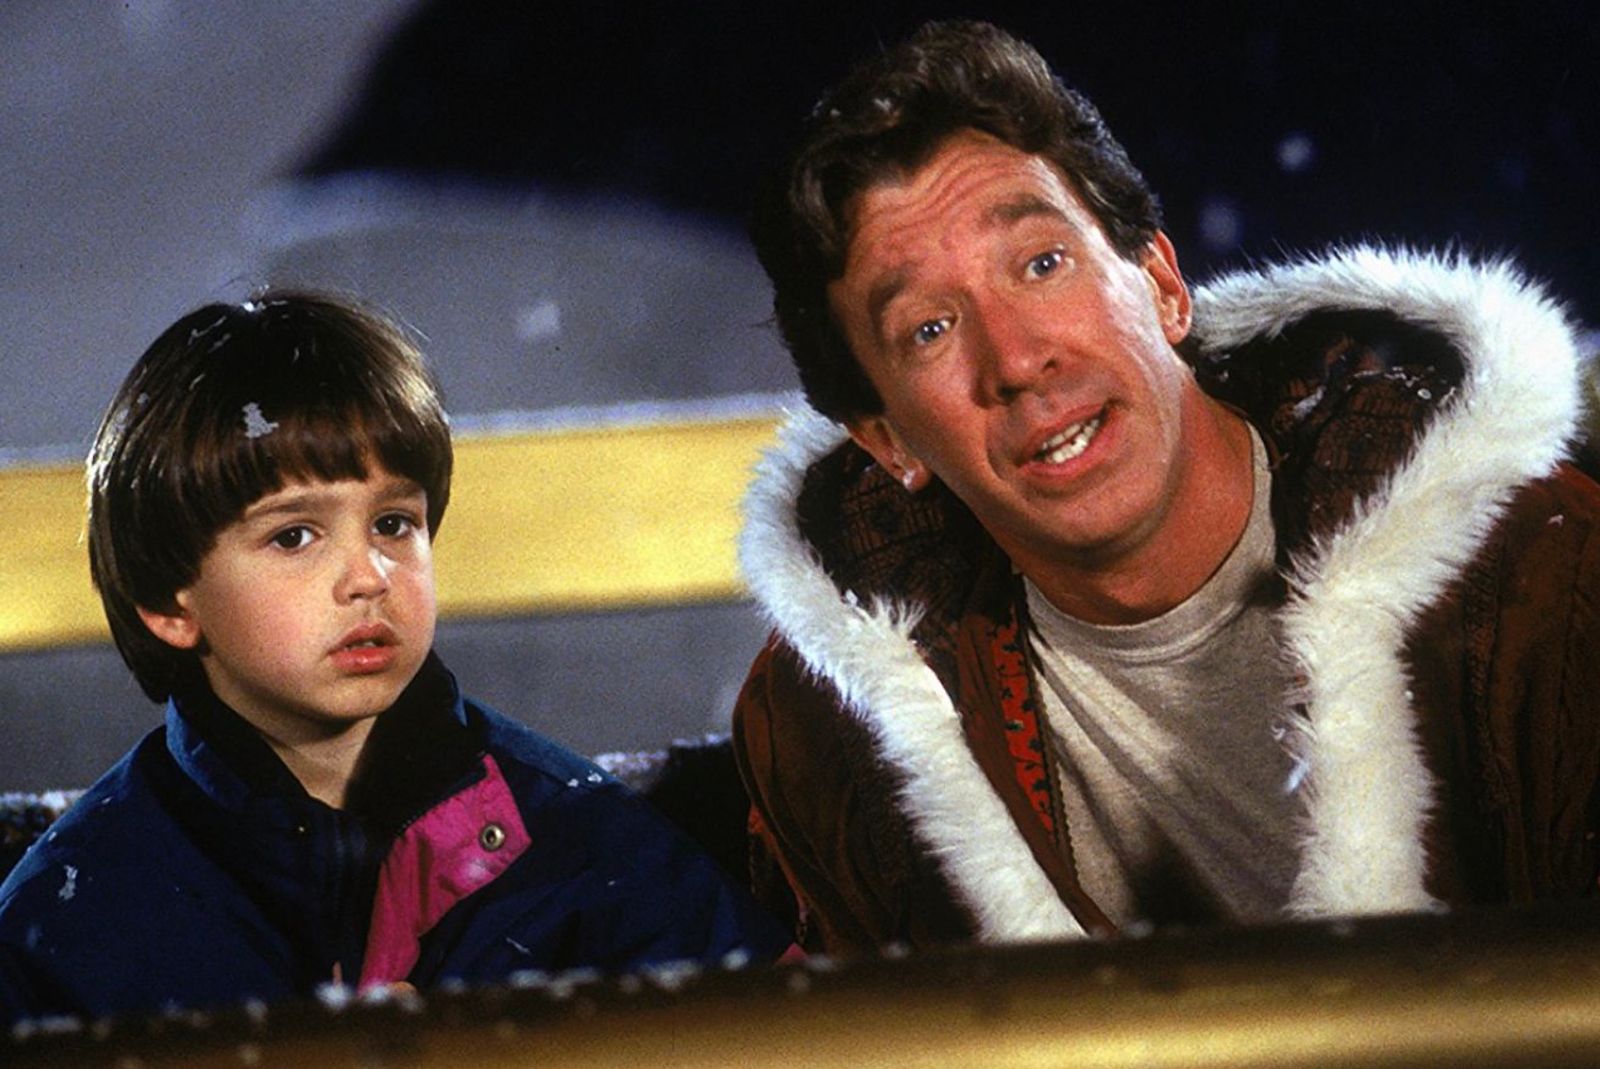 Santa Clause series with Tim Allen: Release date, trailers, and how to watch photo 2